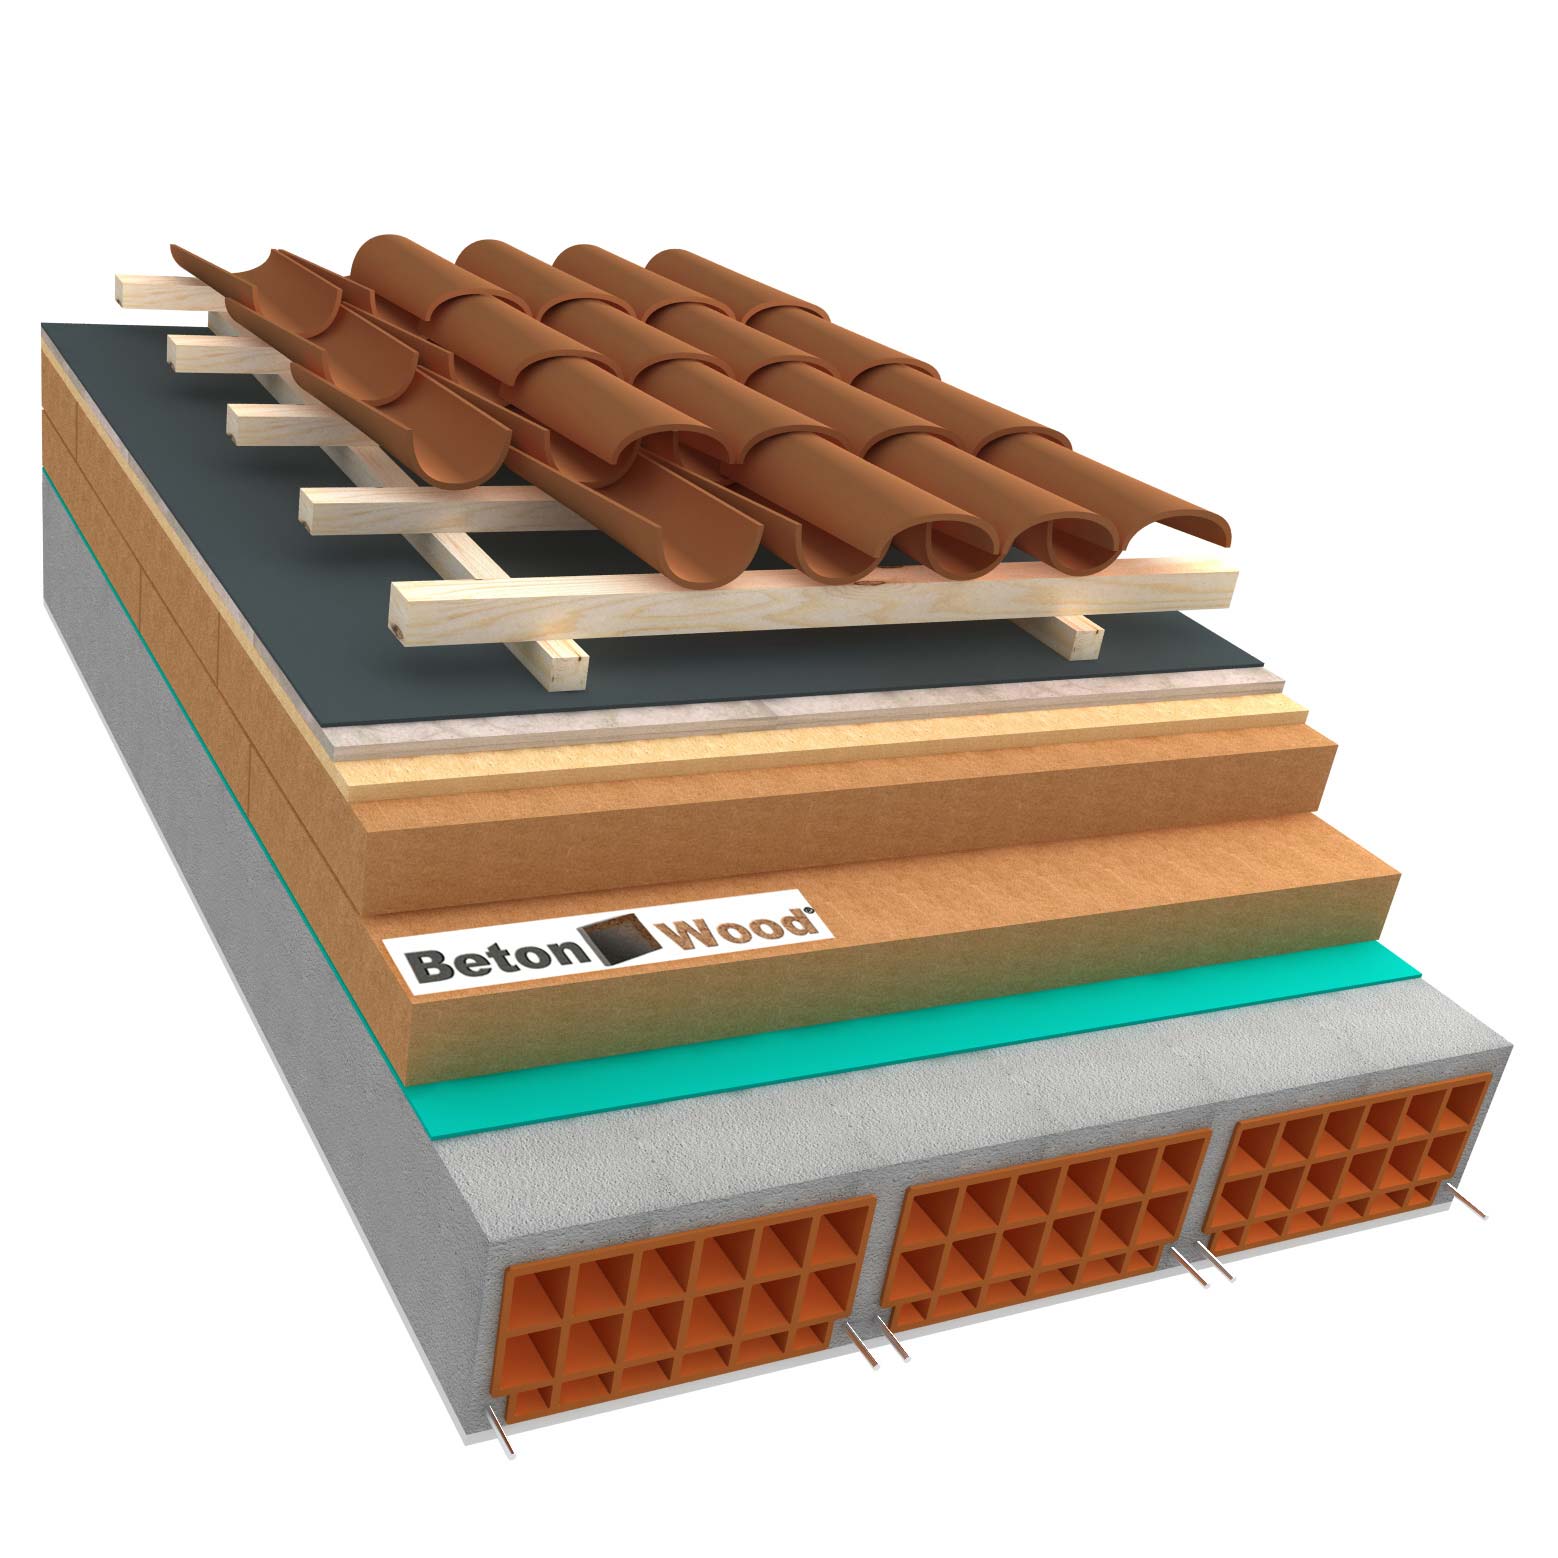 Ventilated roof with wood fiber Isorel, Universal and cement bonded particle boards on concrete